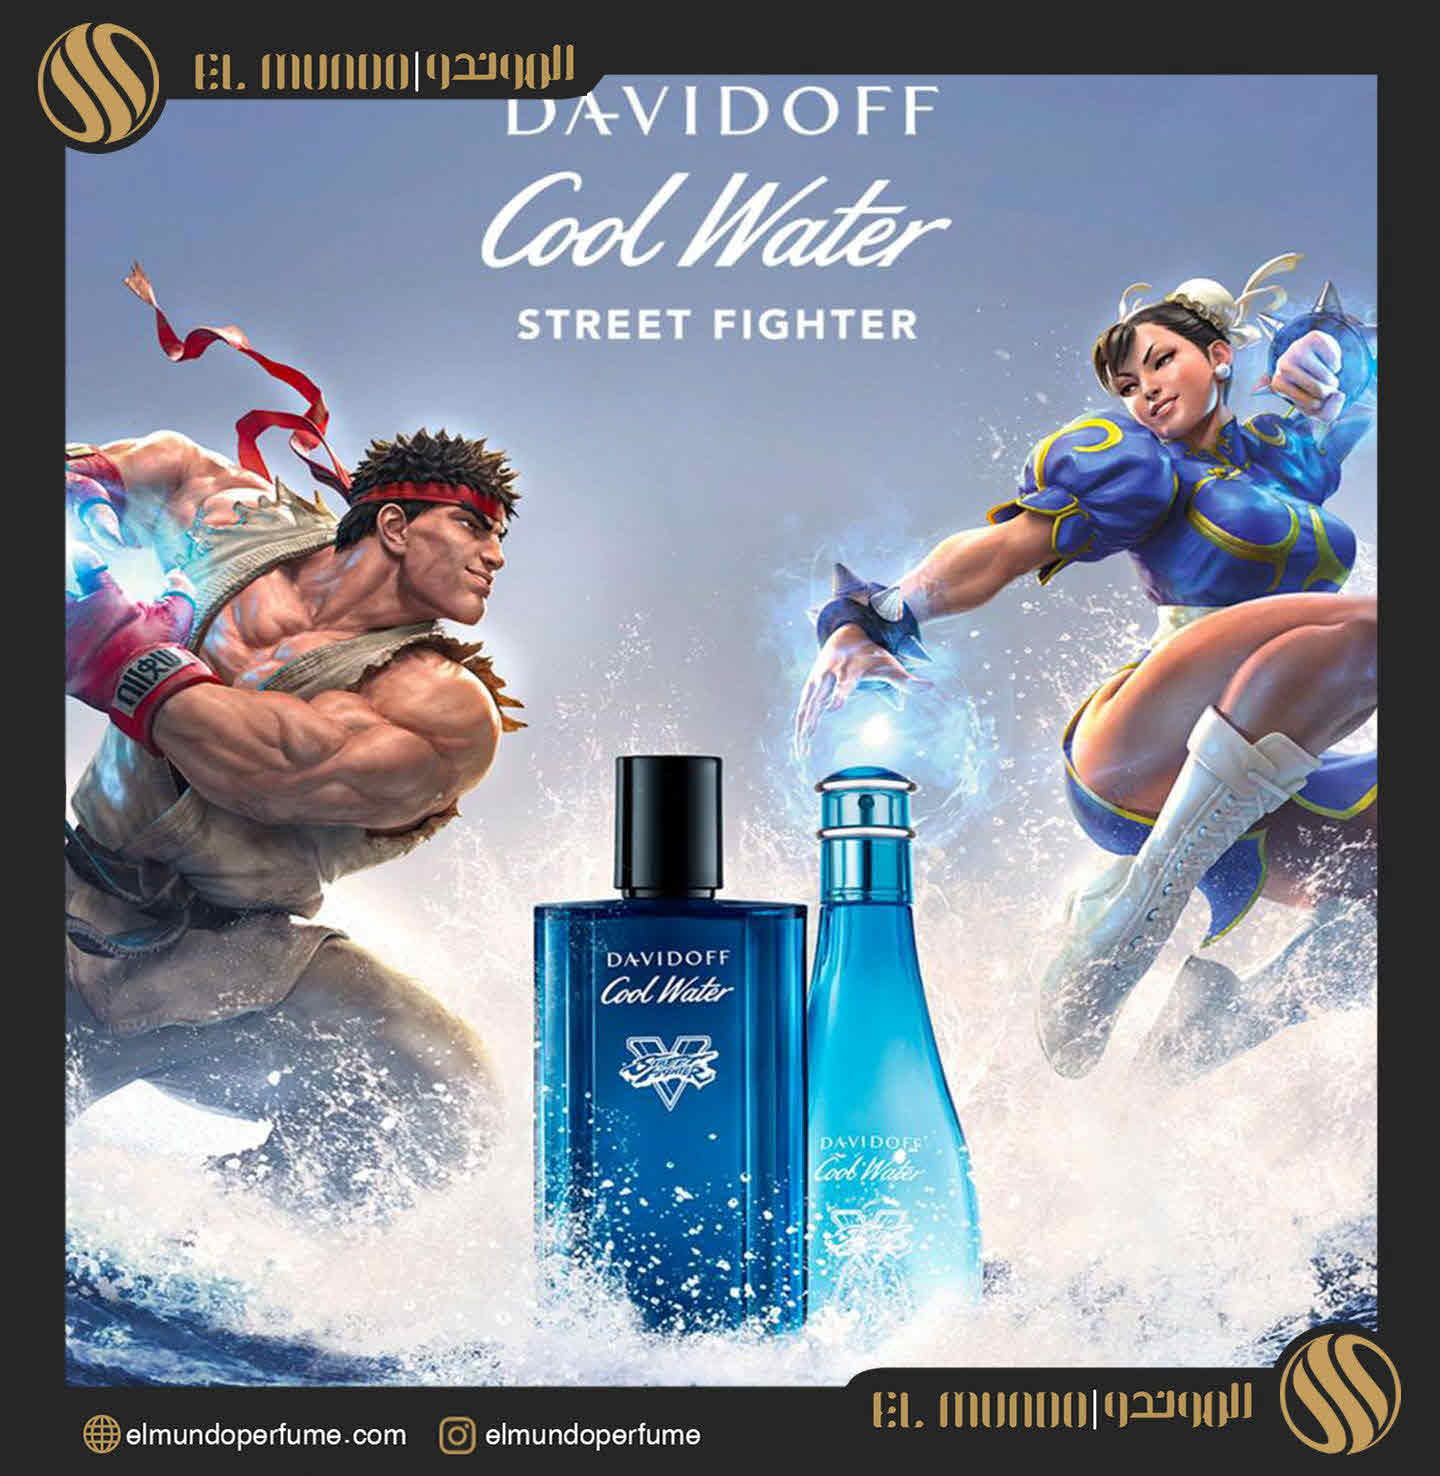 Cool Water Street Fighter Champion Summer Edition For Him Davidoff for men 3 - عطر دیویدوف کول واتر استریت فایتر چمپیون سامر ادیشن